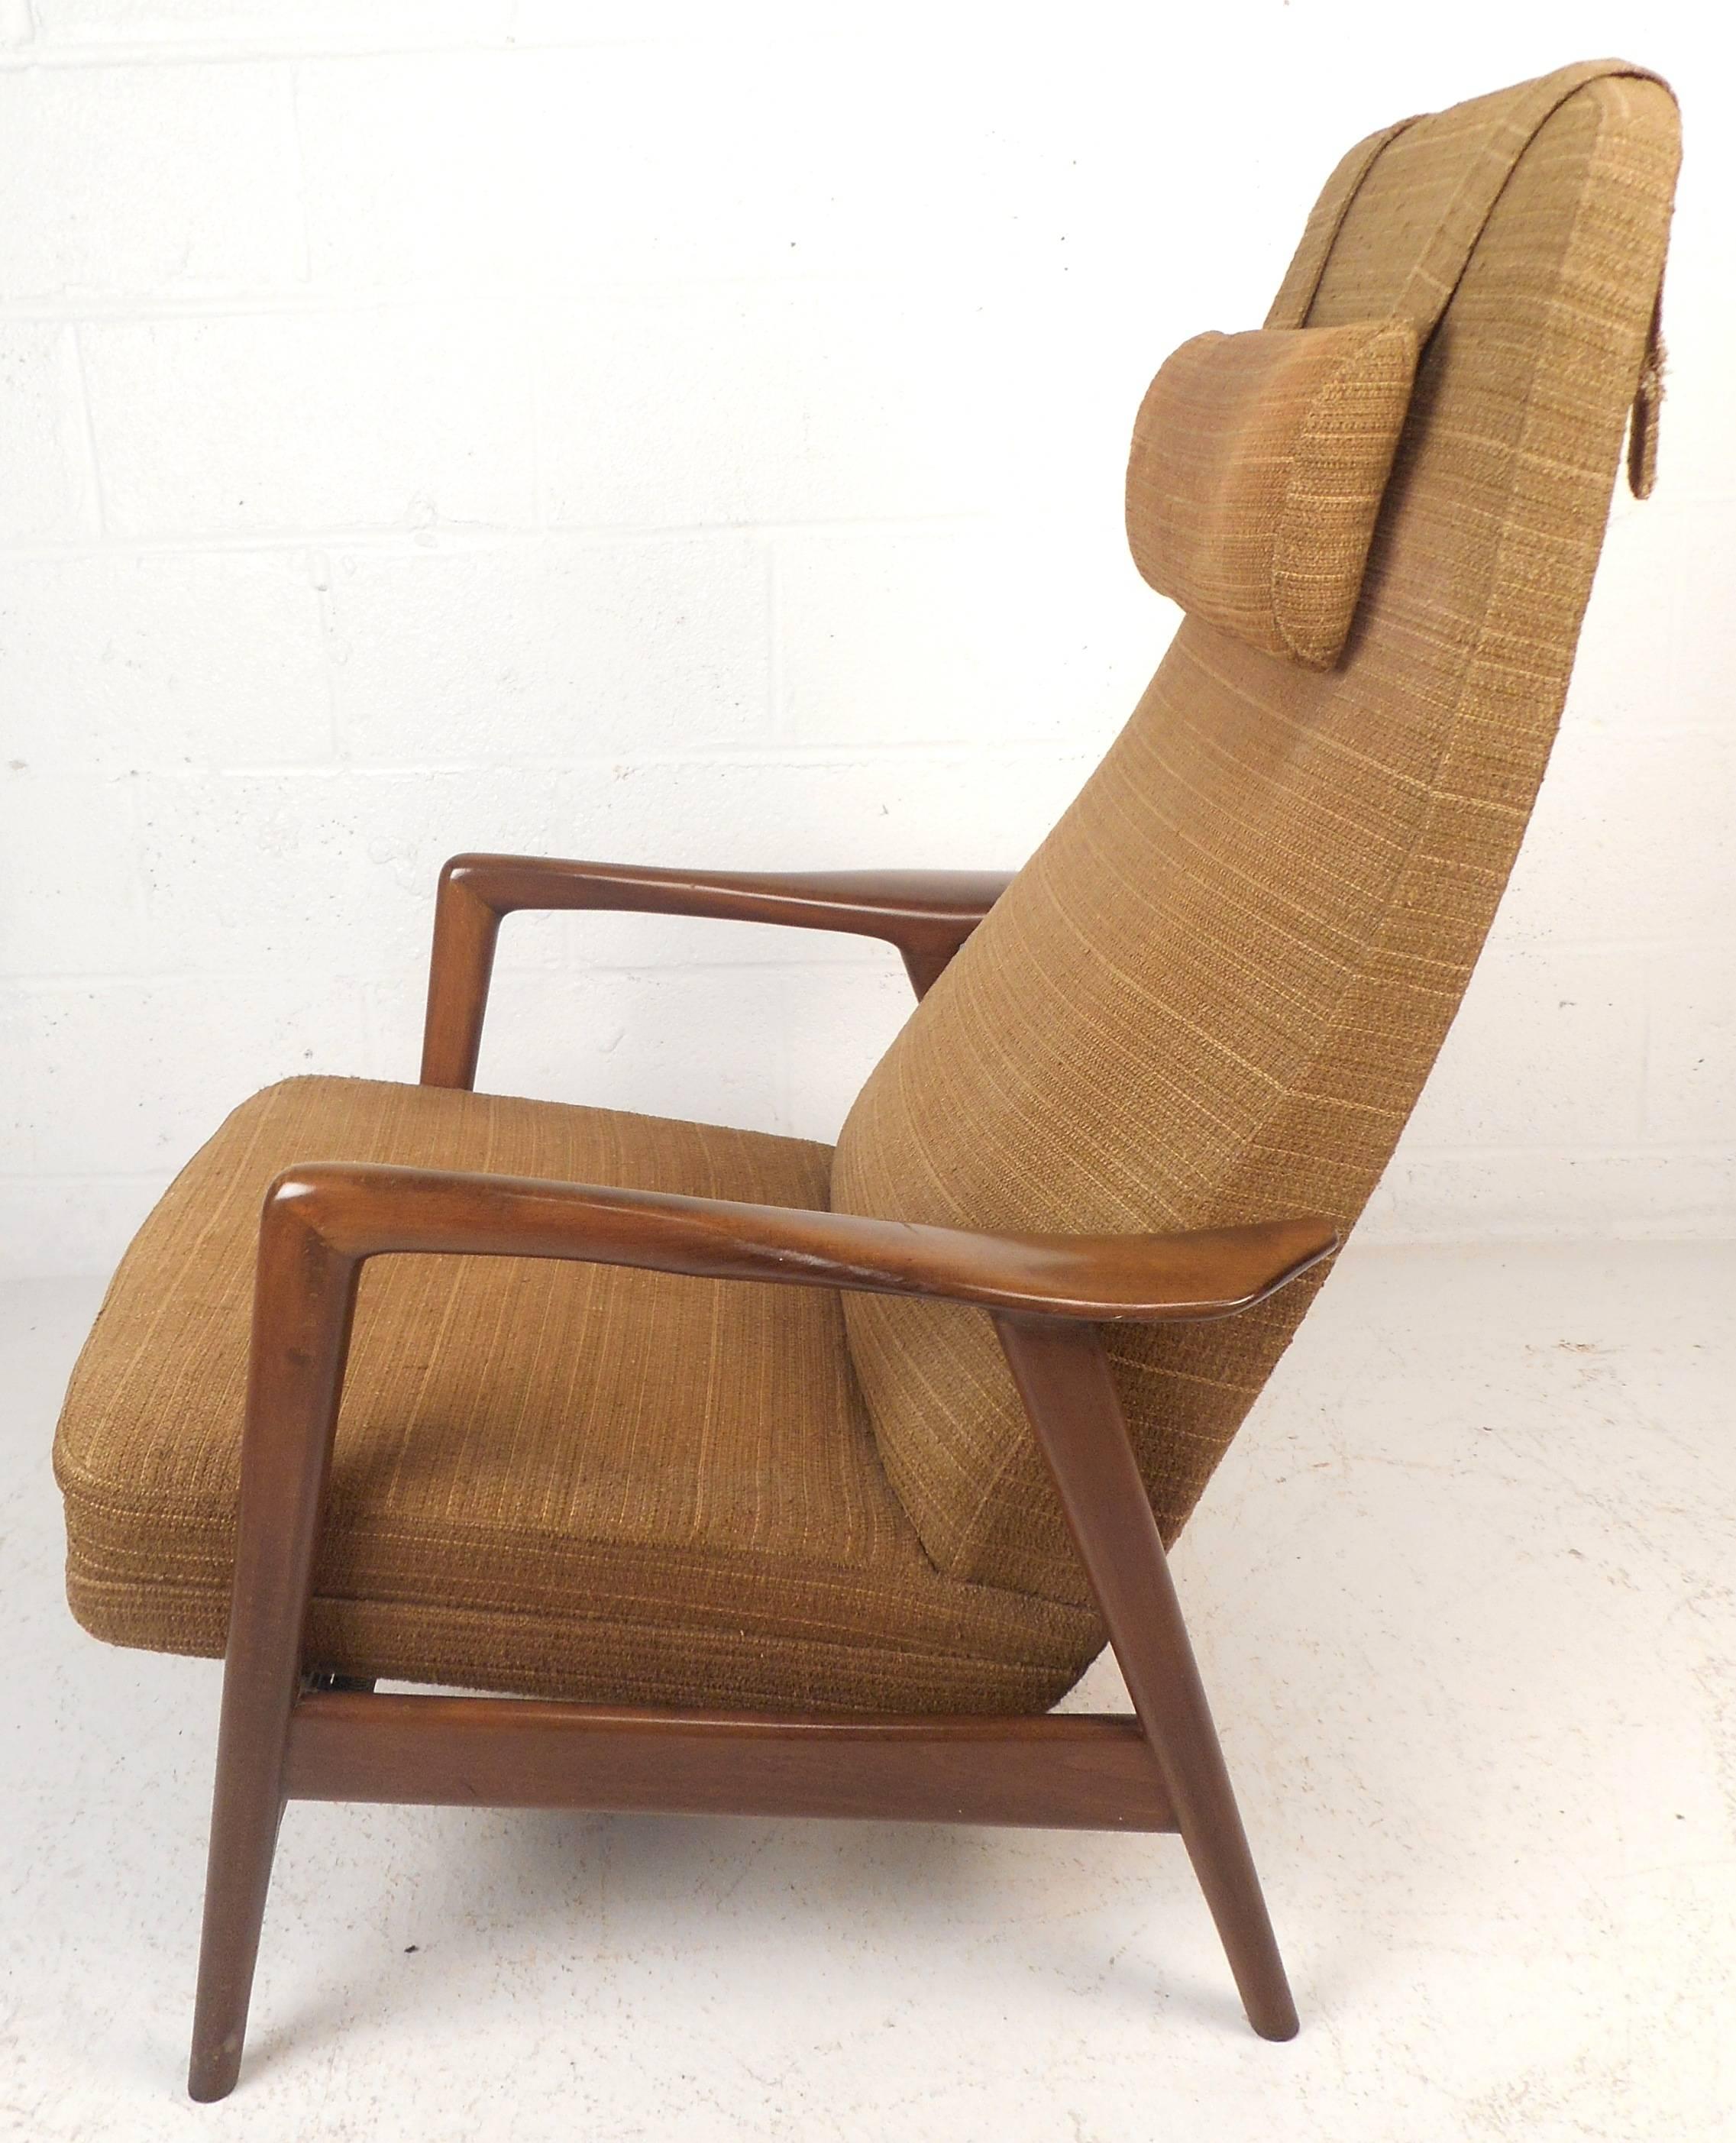 Impressive vintage modern lounge chair features a solid walnut frame, a high backrest, and thick padded cushions. Sleek design with sculpted arm rests and angled legs conveniently reclines ensuring optimal comfort in any setting. This Mid-Century